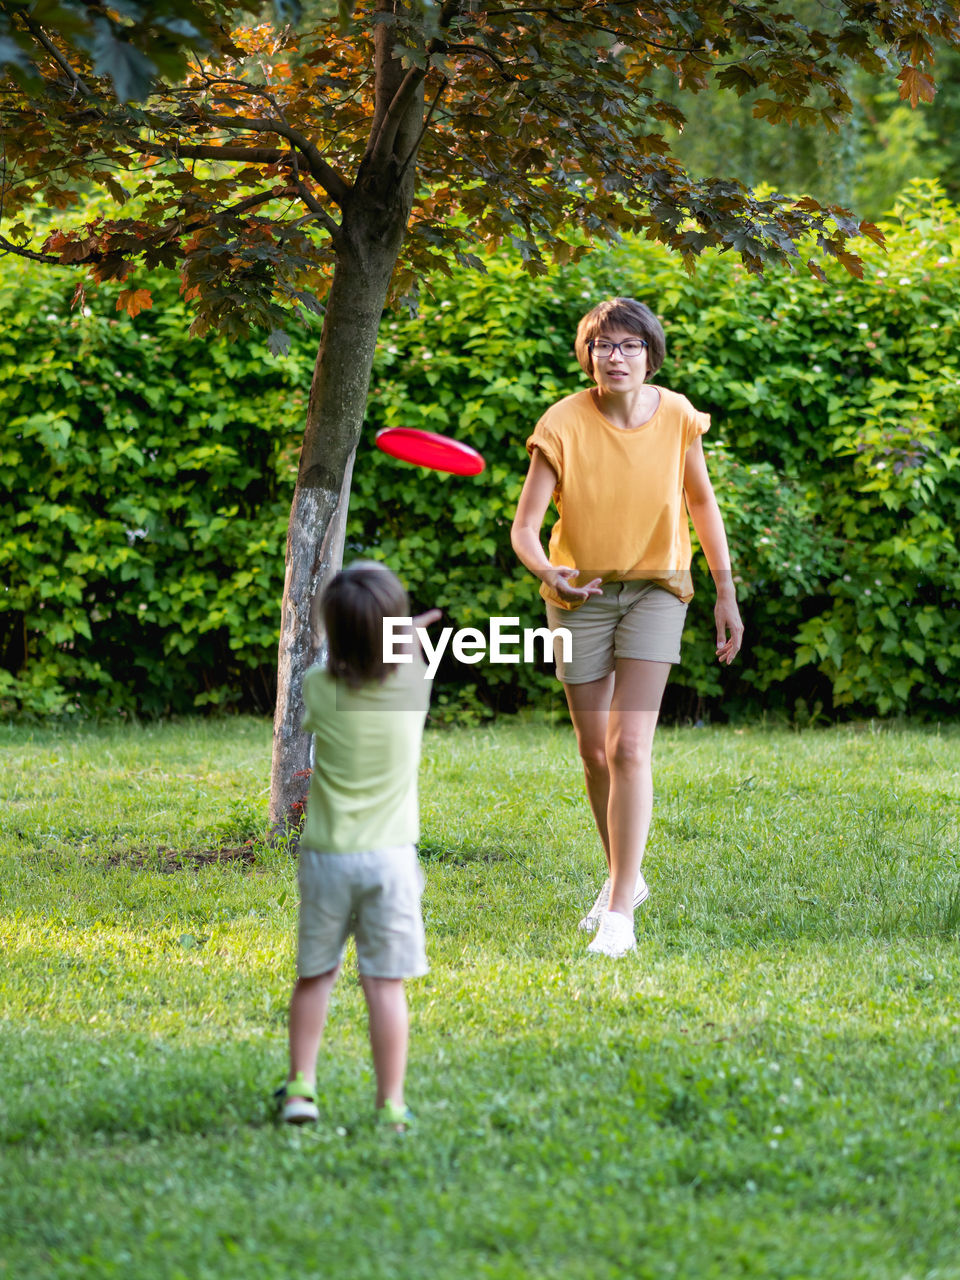 Mother and son play frisbee on grass lawn. outdoor leisure. family life. sports game at backyard.